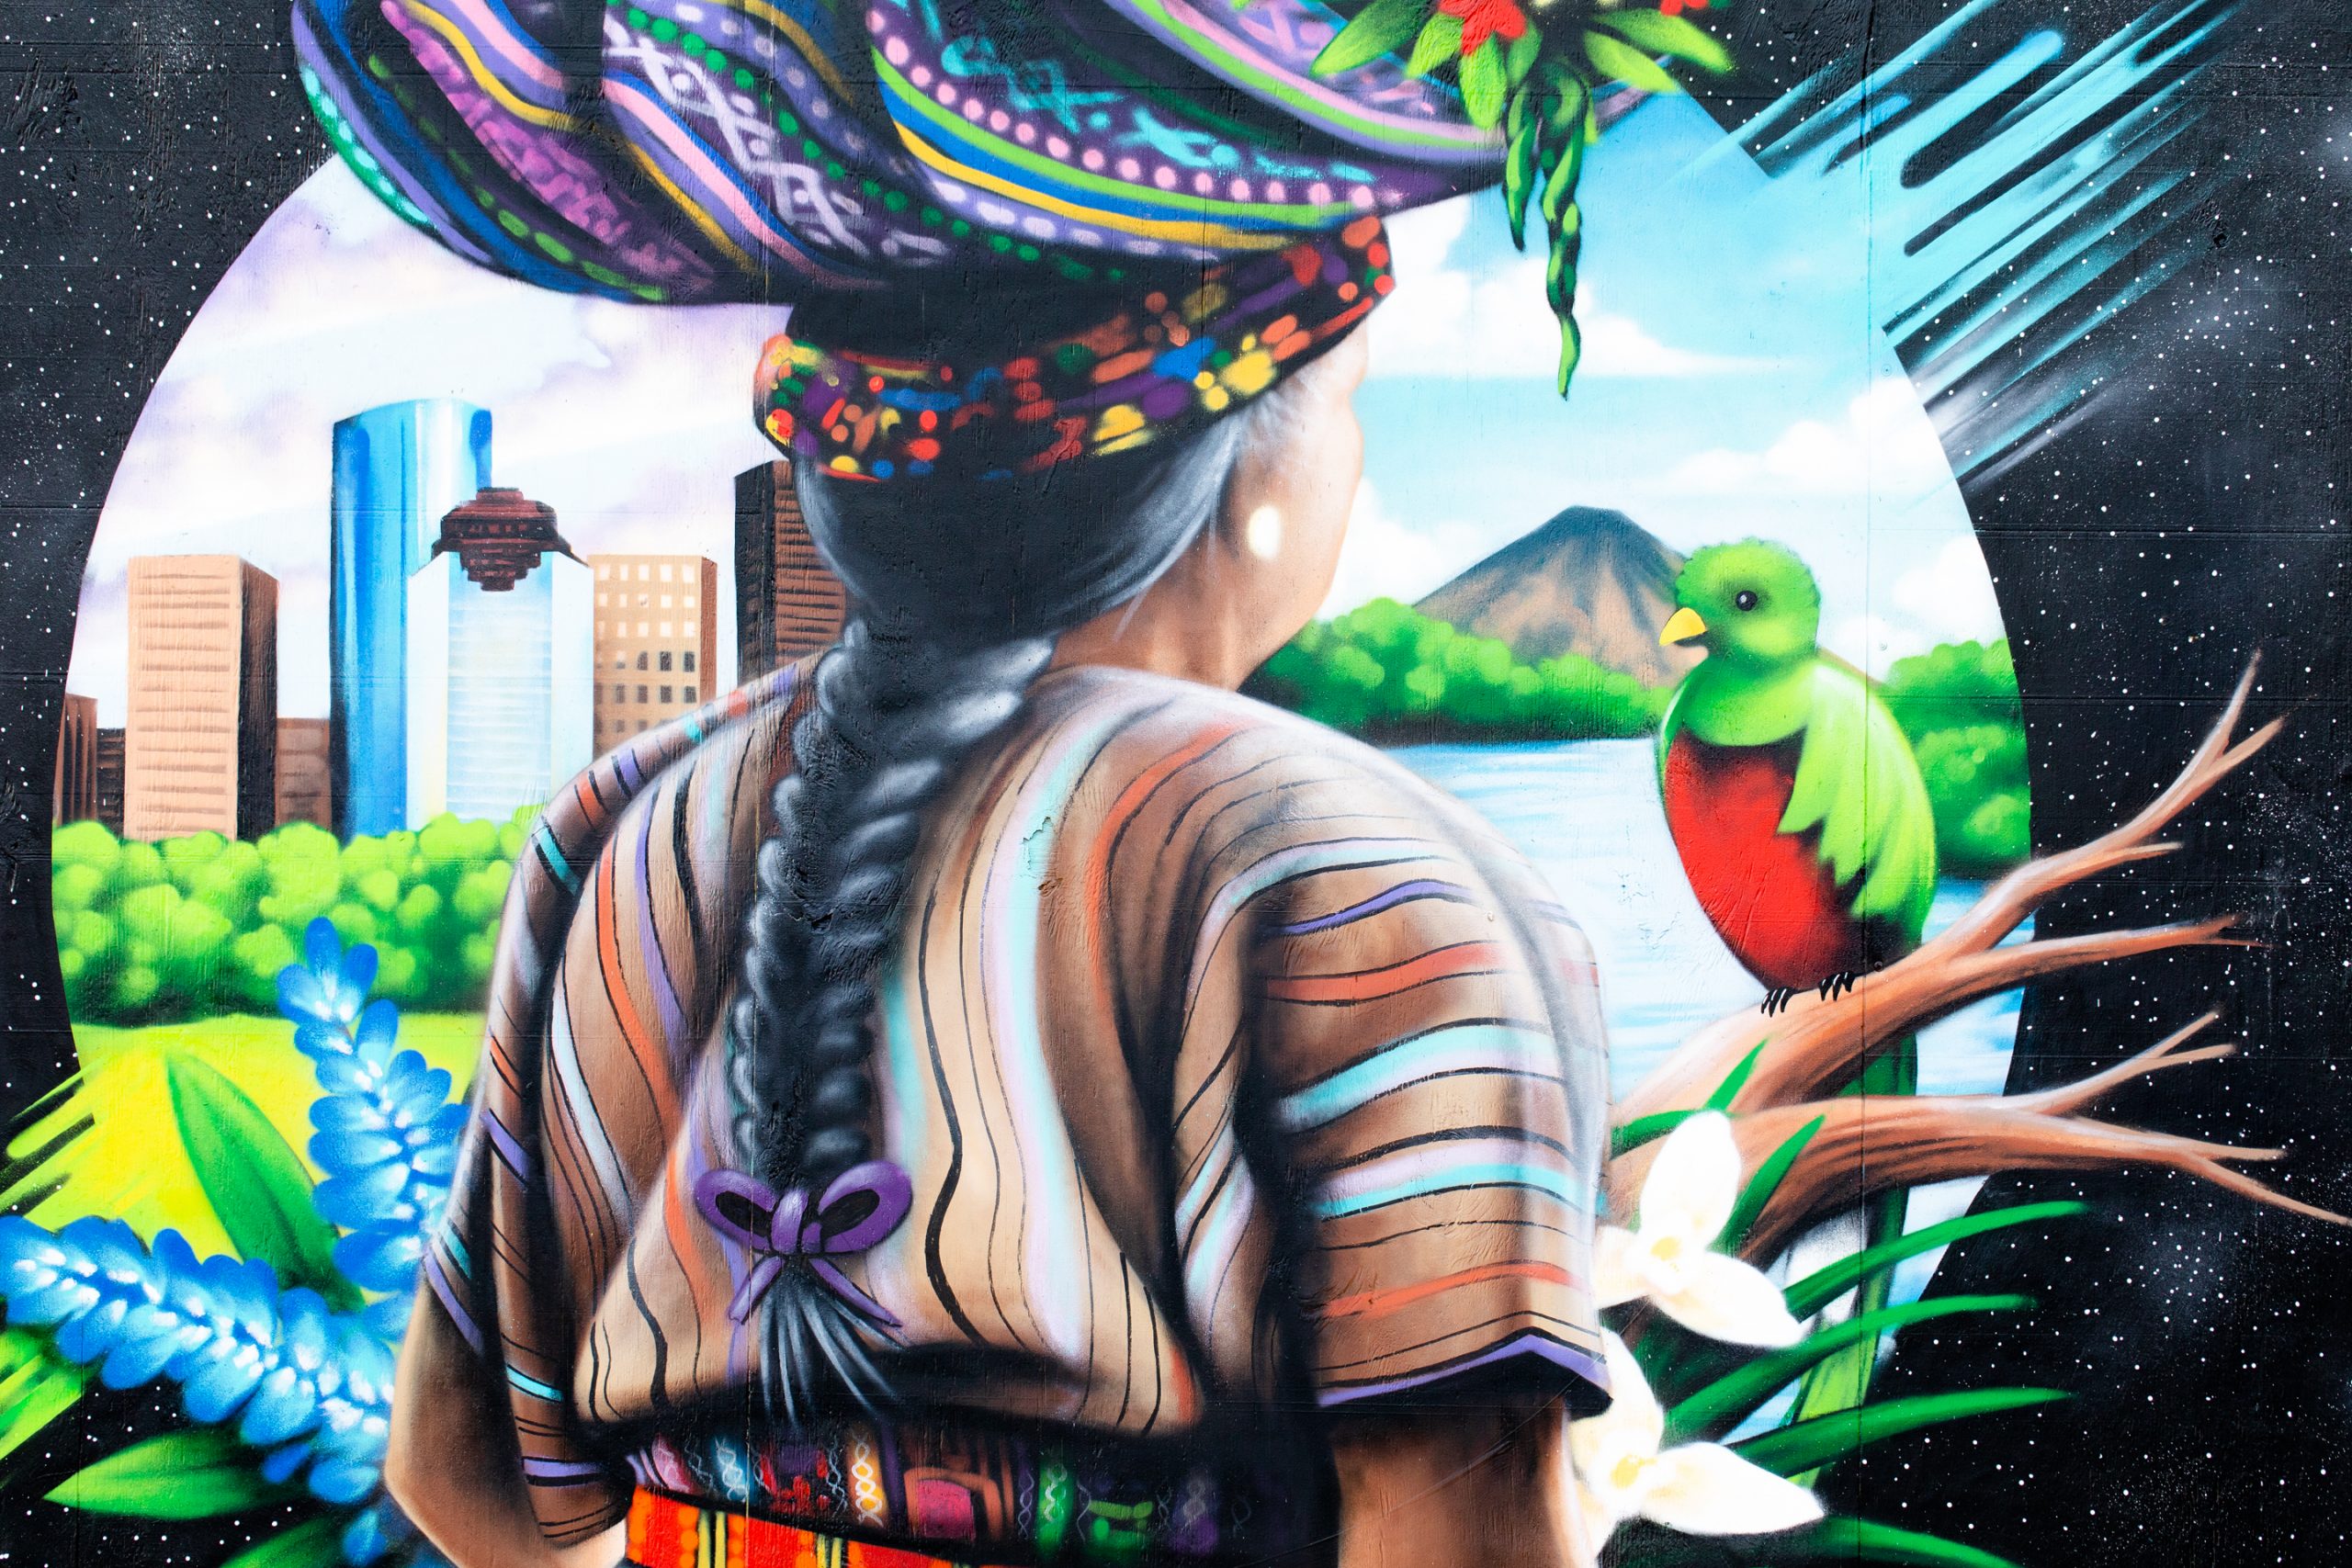 Earth Day Murals at Discovery Green 